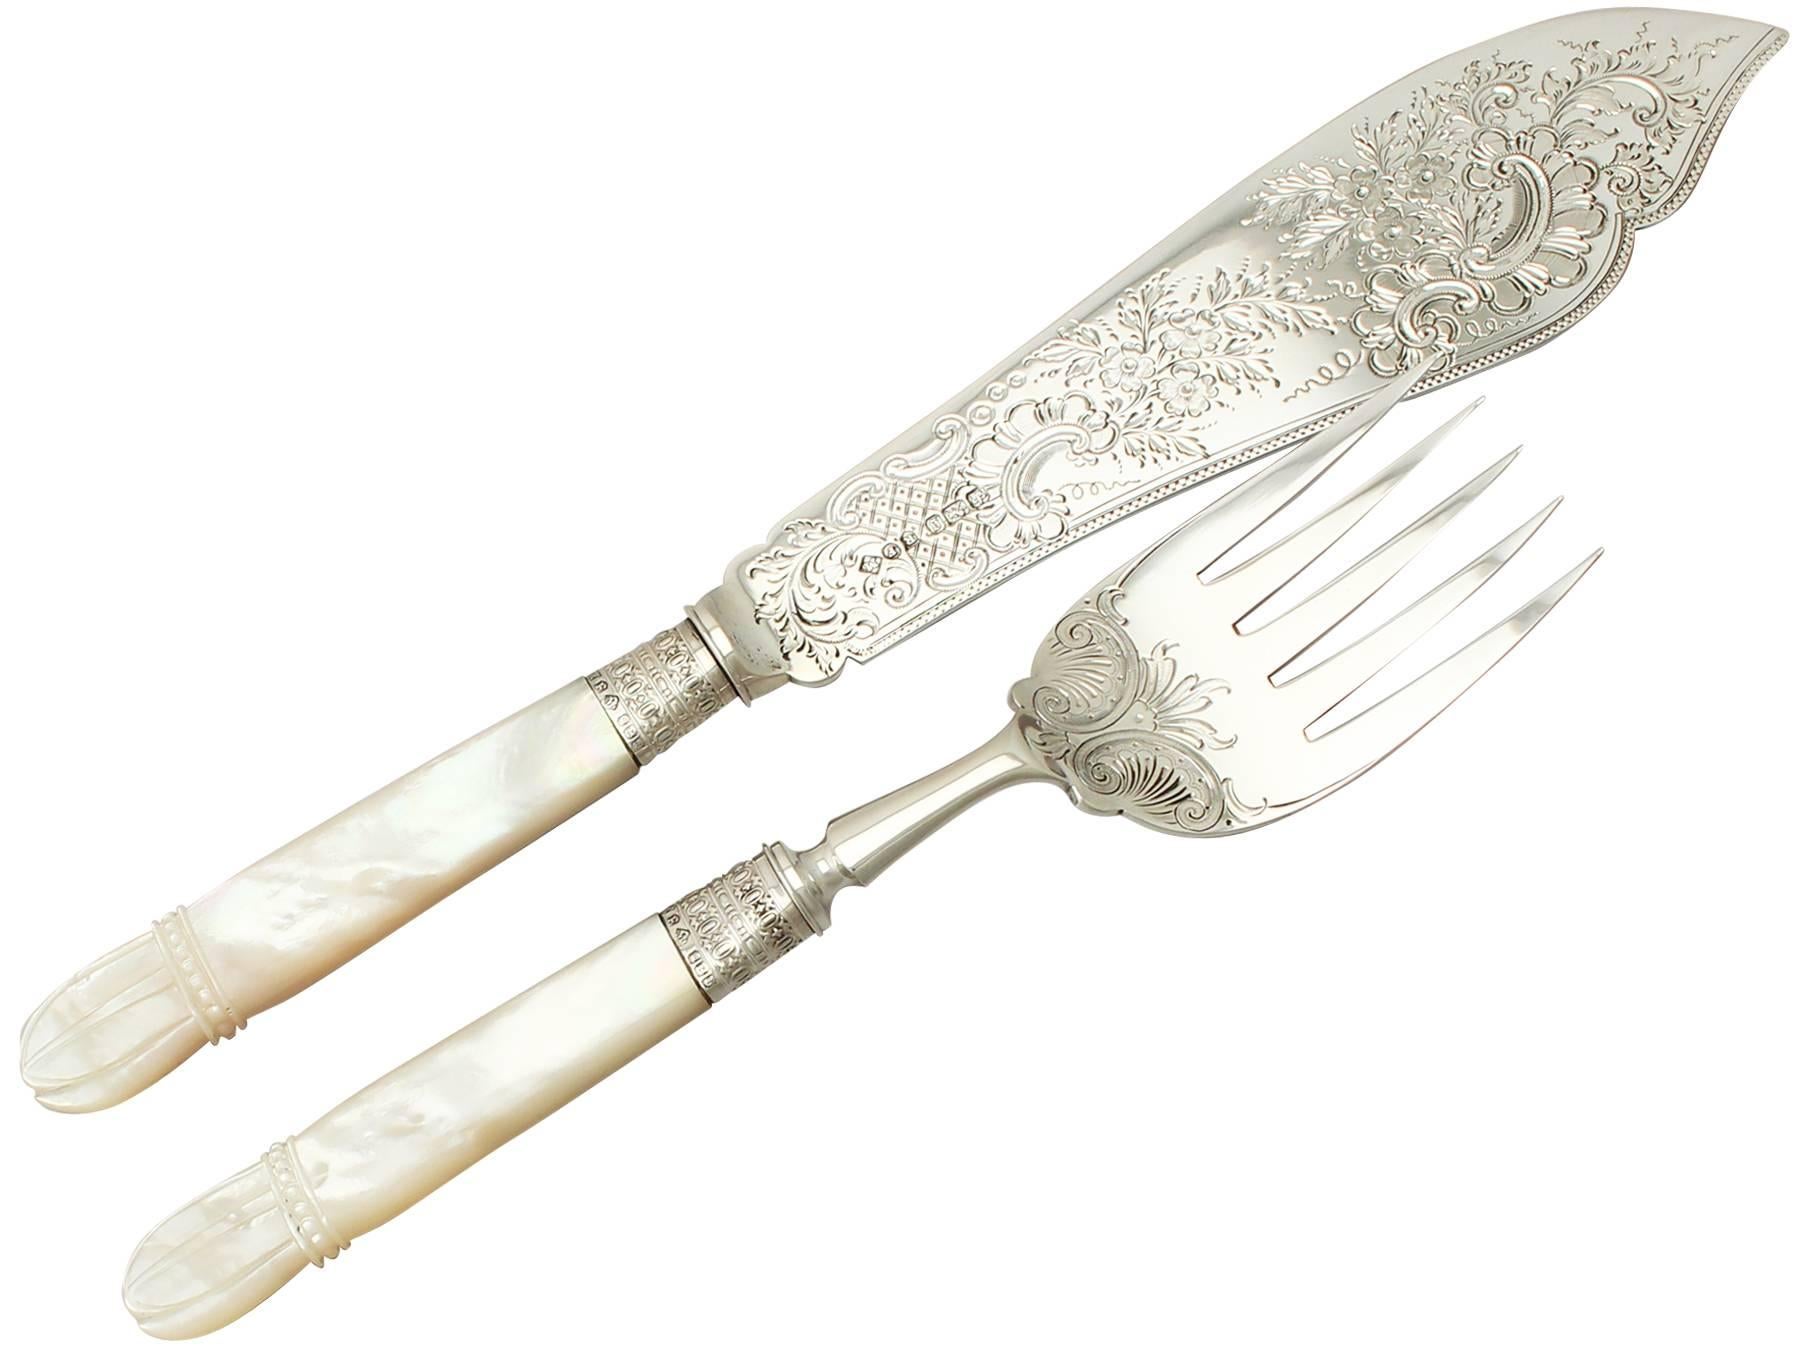 This exceptional pair of antique Victorian mother of pearl handled sterling silver fish servers consists of a serving knife and fork.

The blade of the knife and the drop of the fork have an incurved shaped form.

The anterior of the knife is